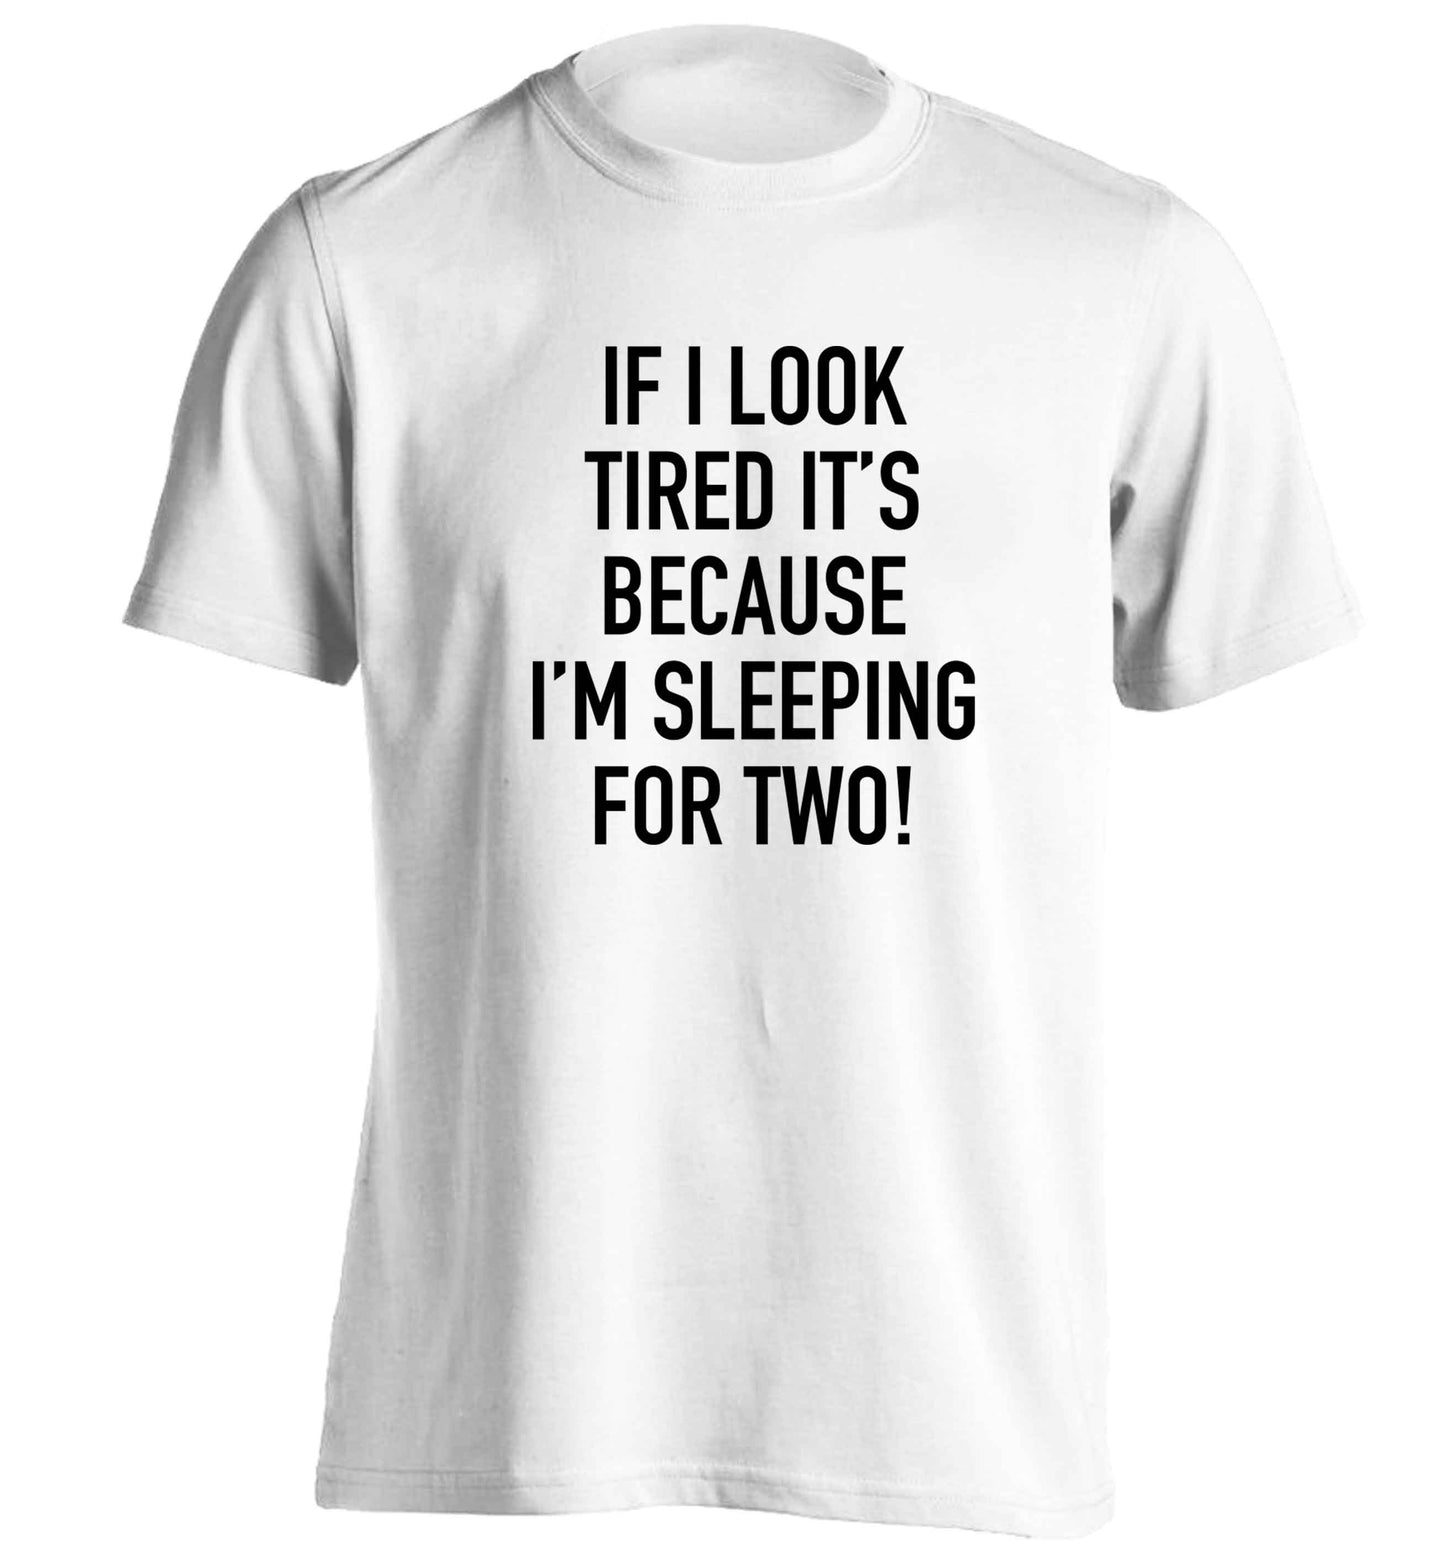 If I look tired it's because I'm sleeping for two adults unisex white Tshirt 2XL